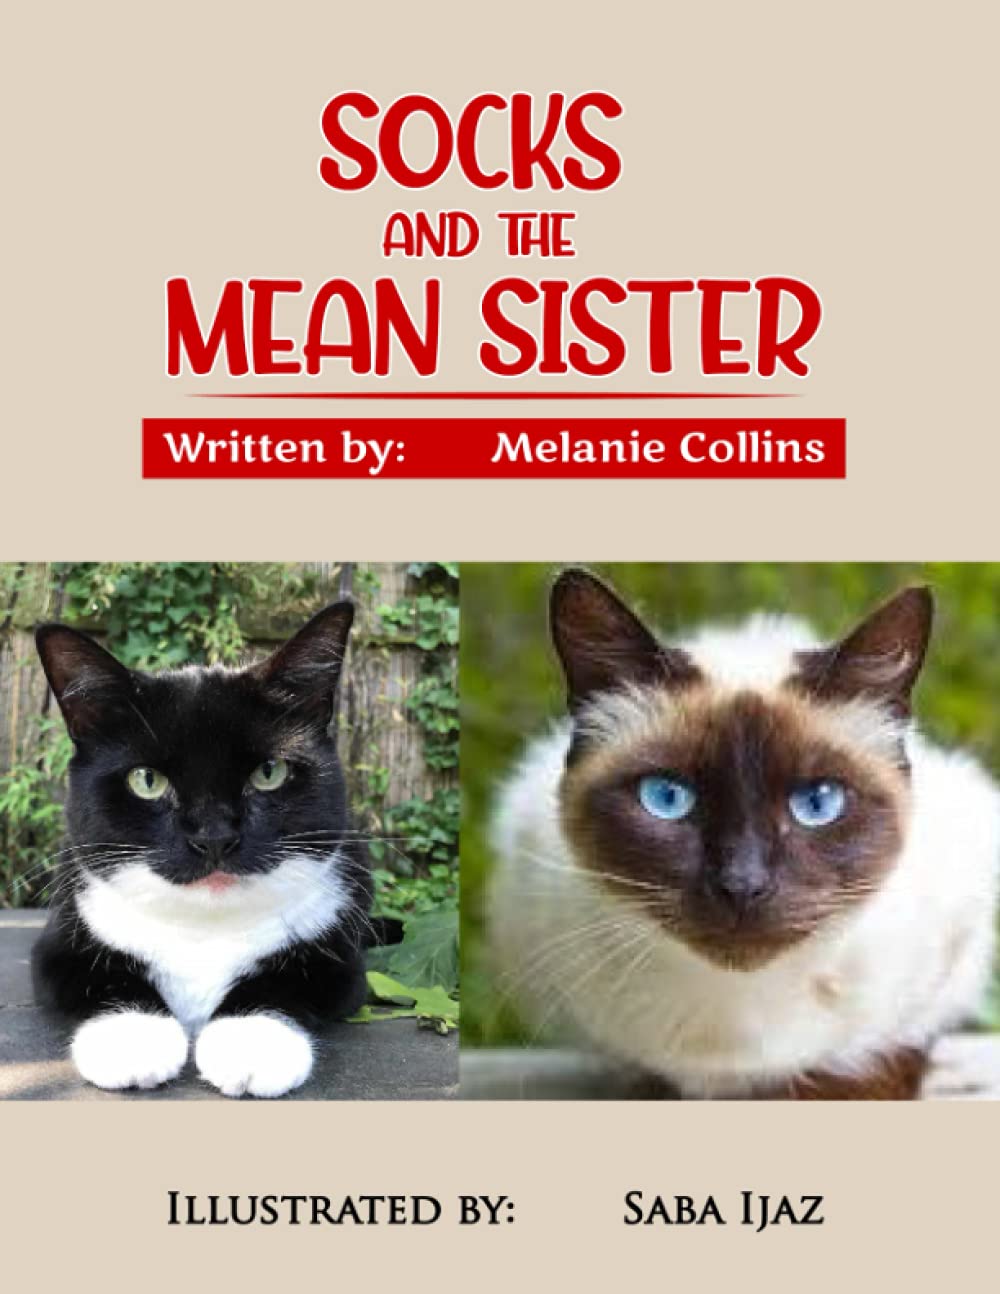 Socks and the Mean Sister